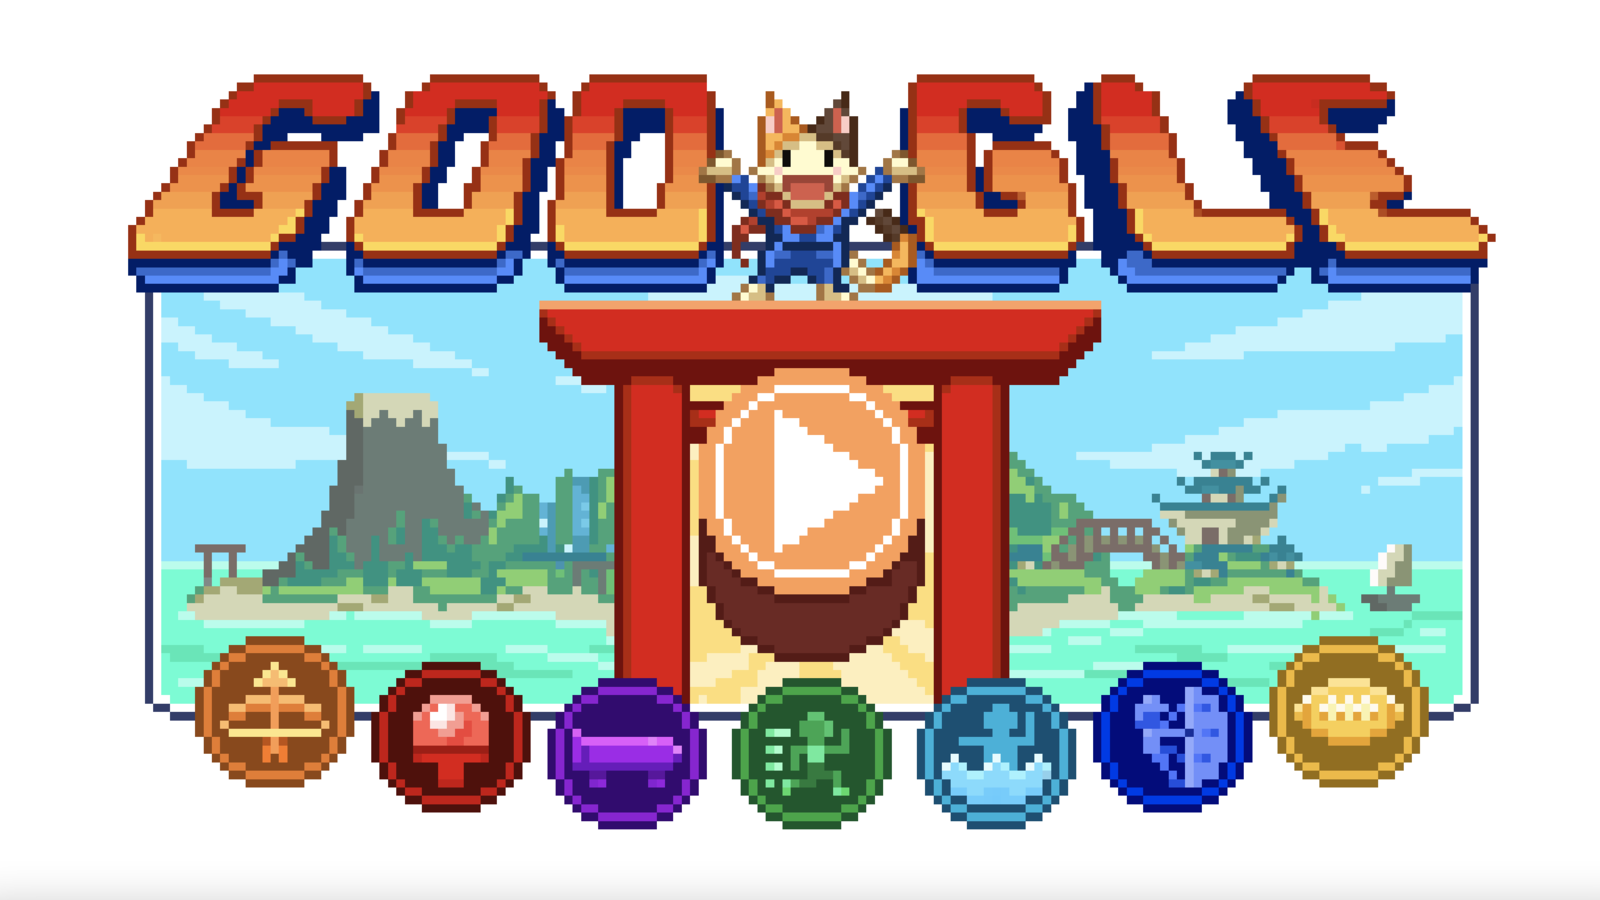 Today S Google Doodle Celebrates Tokyo Olympics And Lets You Play Some Fun Video Games Ht Tech